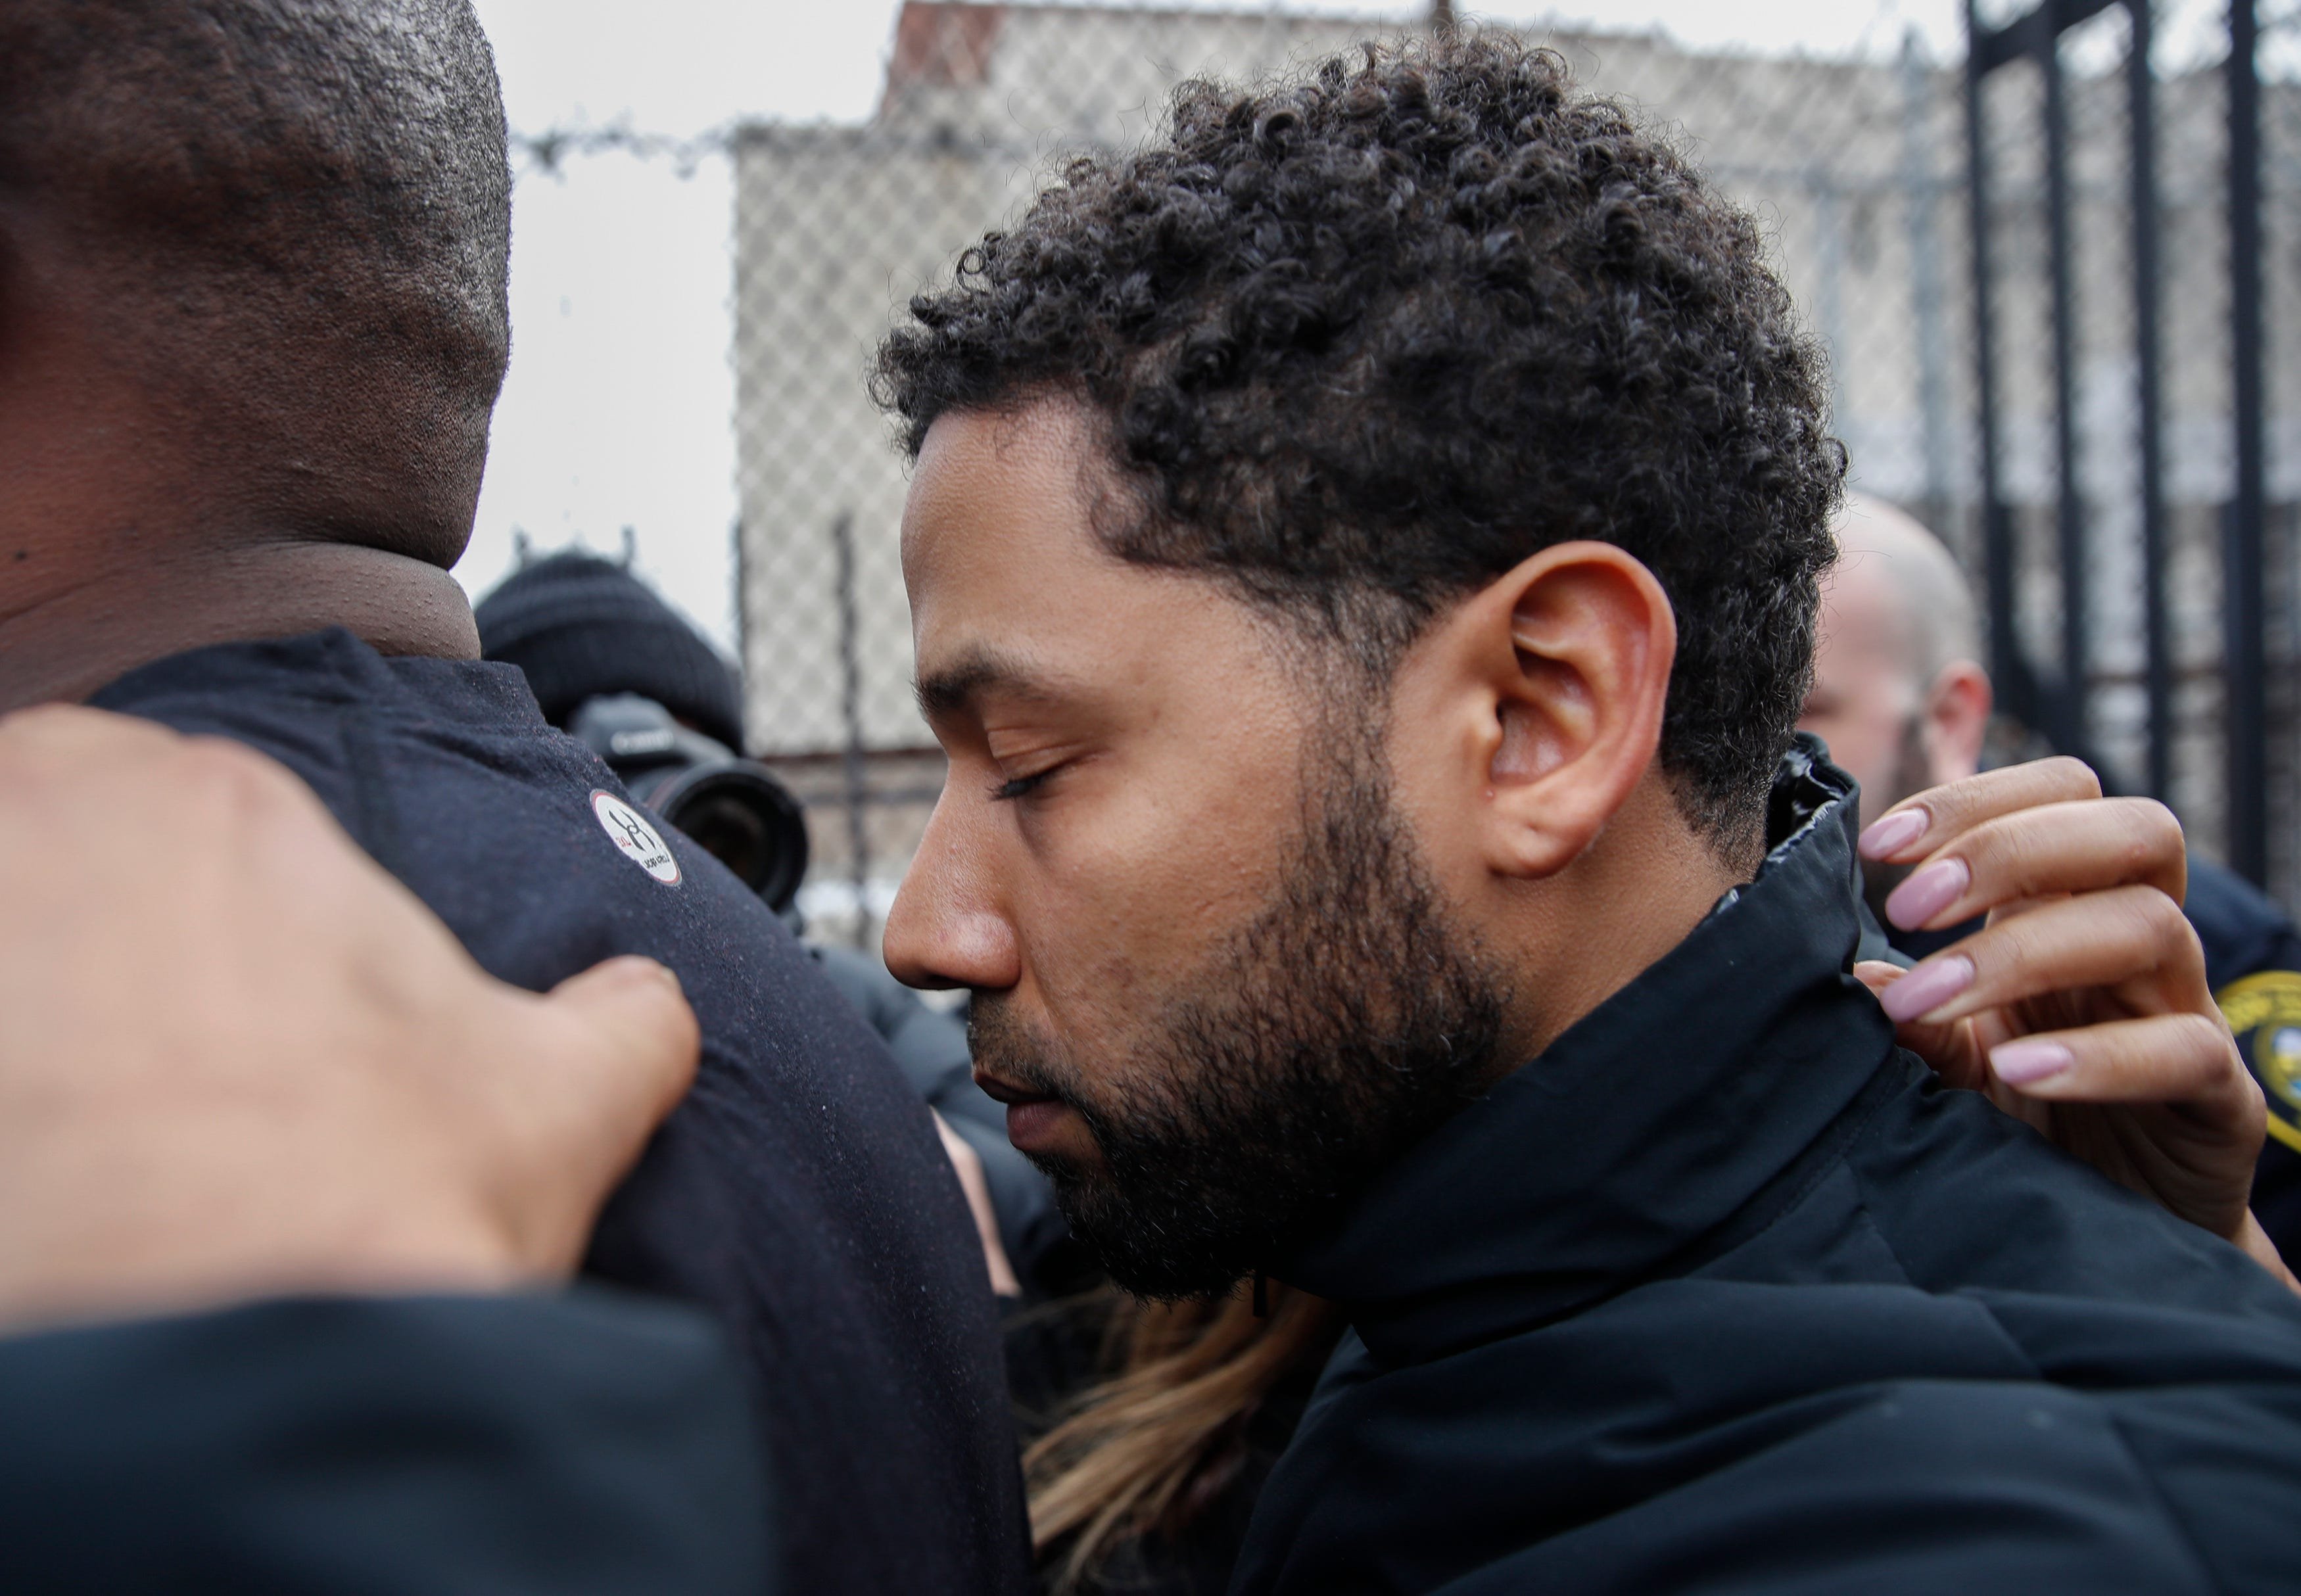 Jussie Smollett needs compassion as well as justice for hate crime hoax